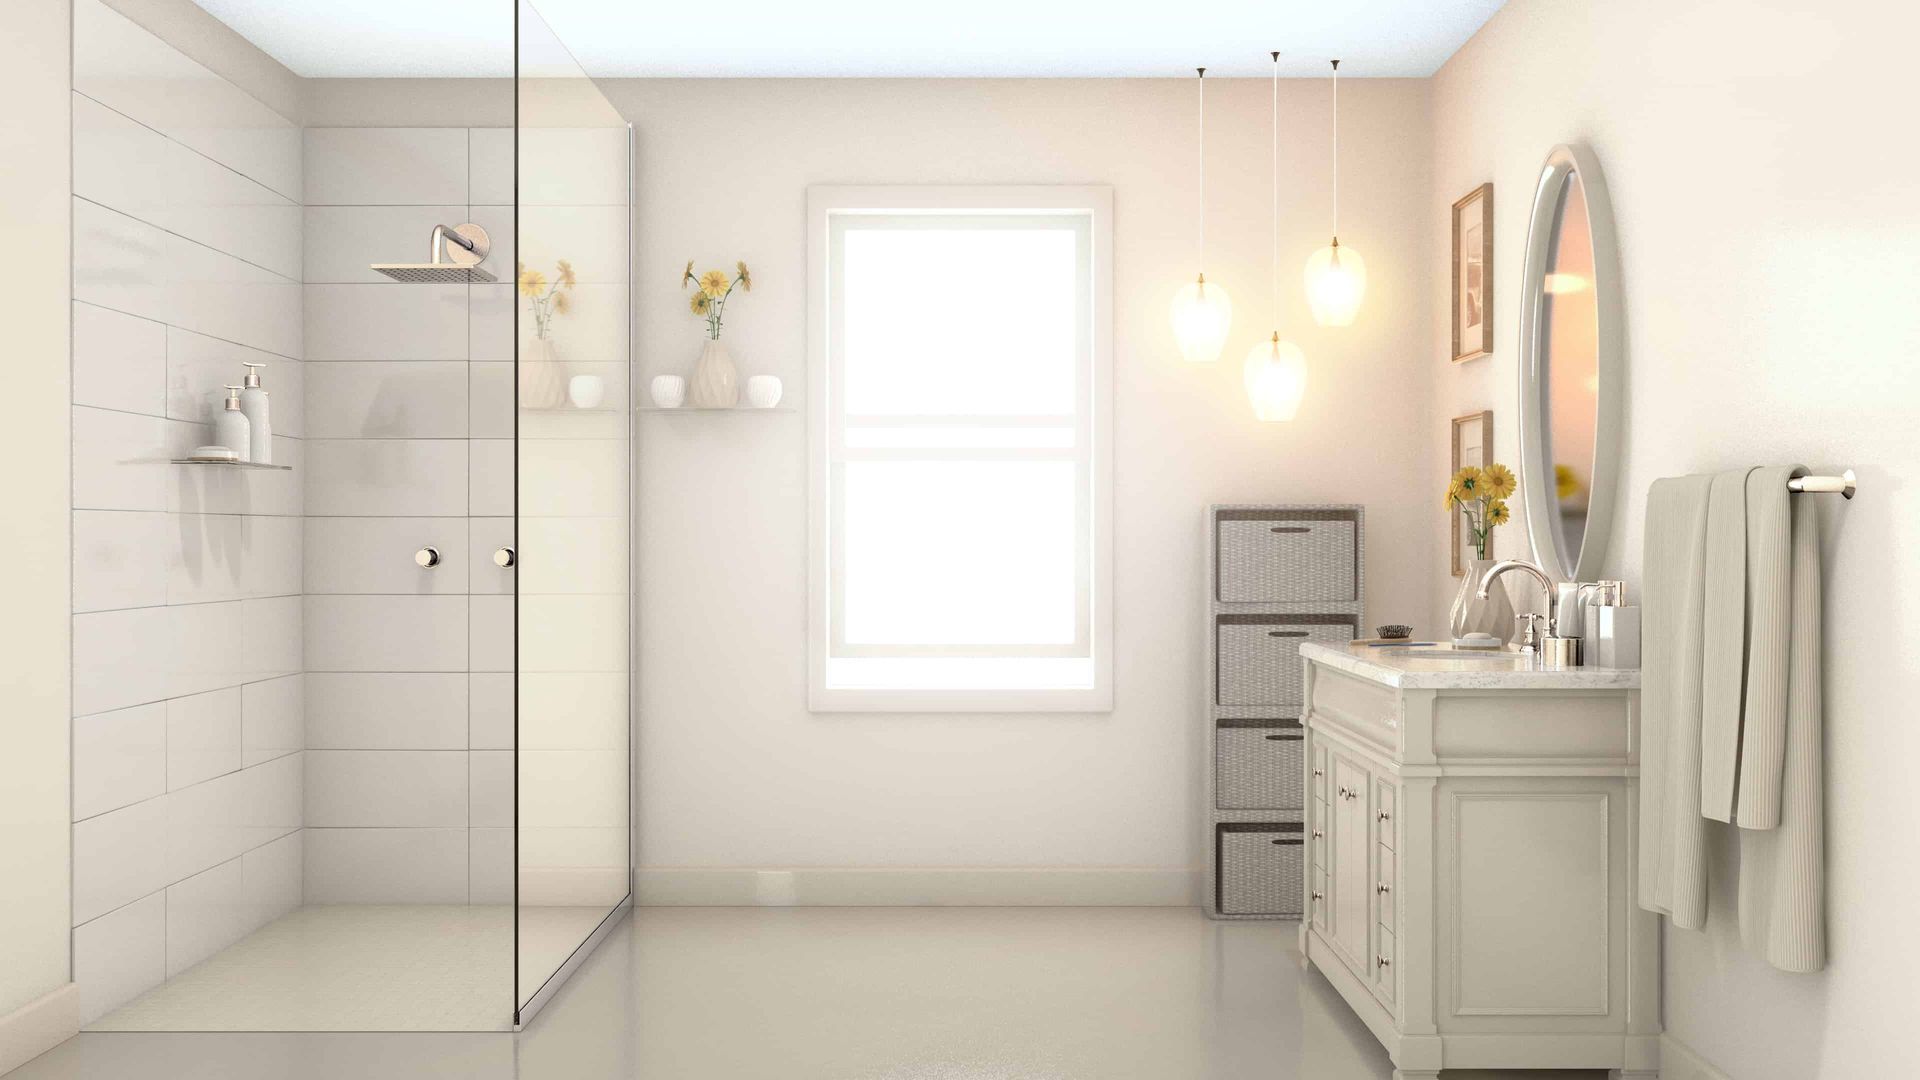 Gorgeous, high-quality cabinets  in bathroom, with beige finishes